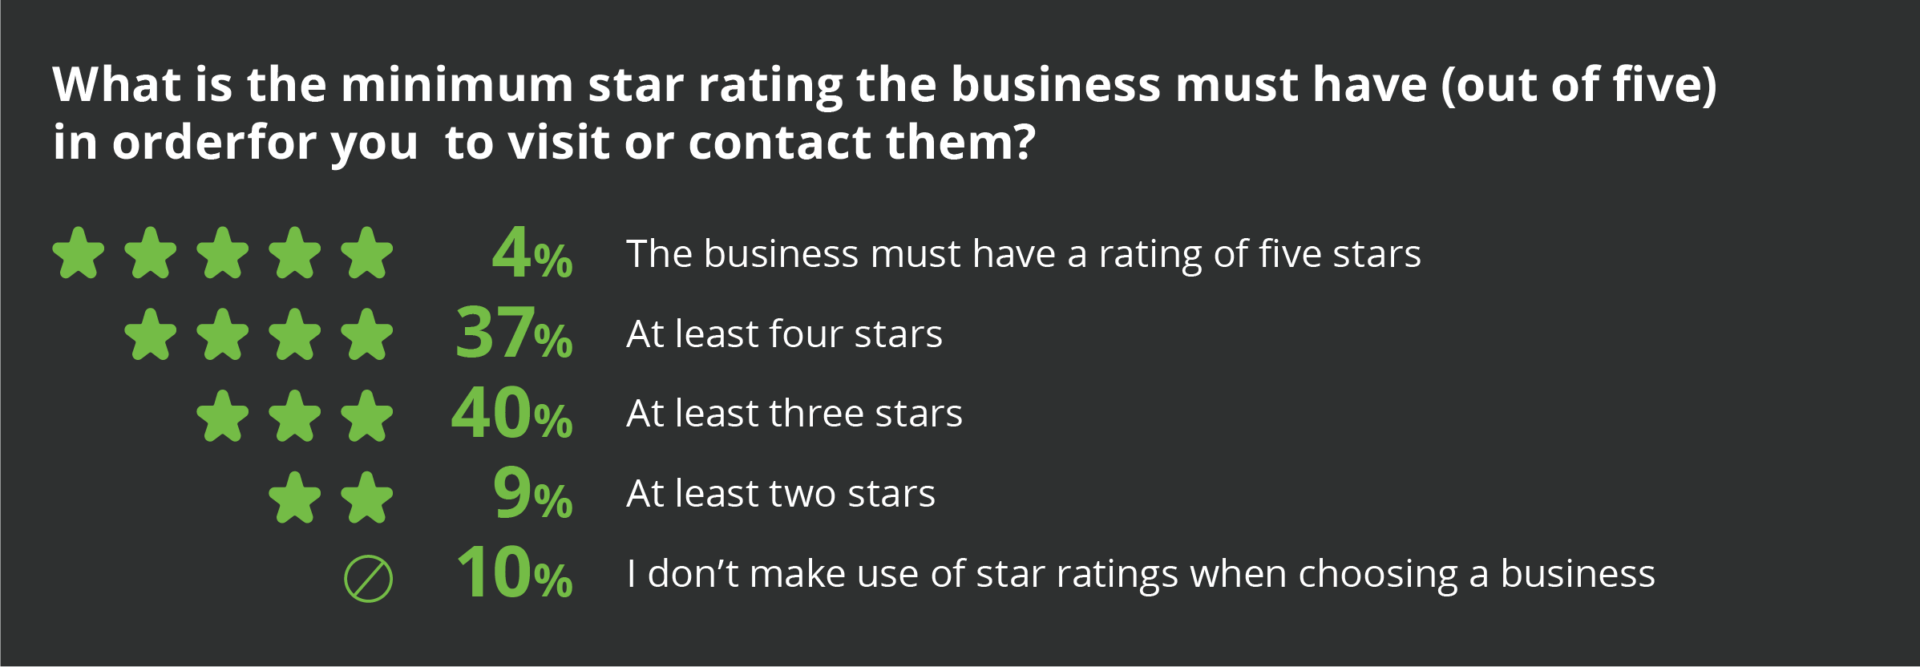 CBI survey result showing how many stars a local business must have to be considered by consumers. White text and green stars on a black background. 